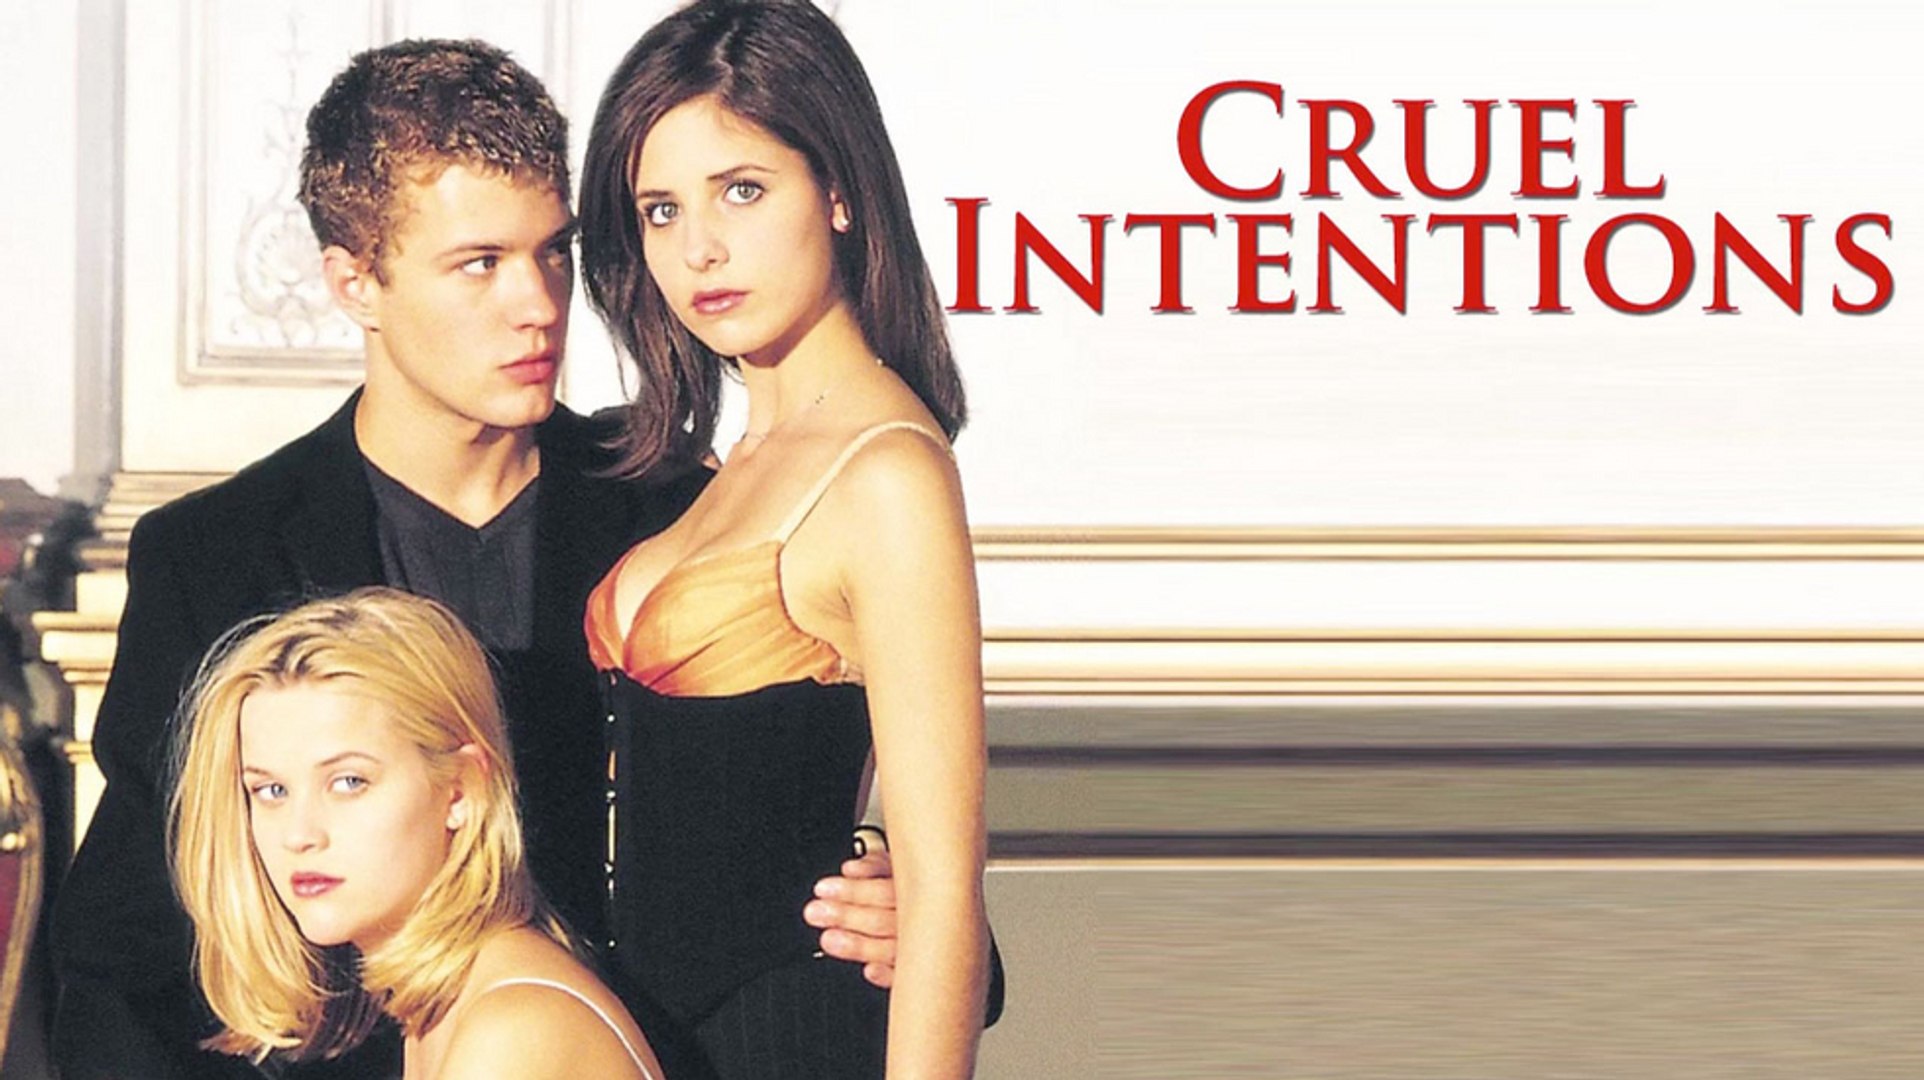 chanakya mishra recommends cruel intentions full movie free pic